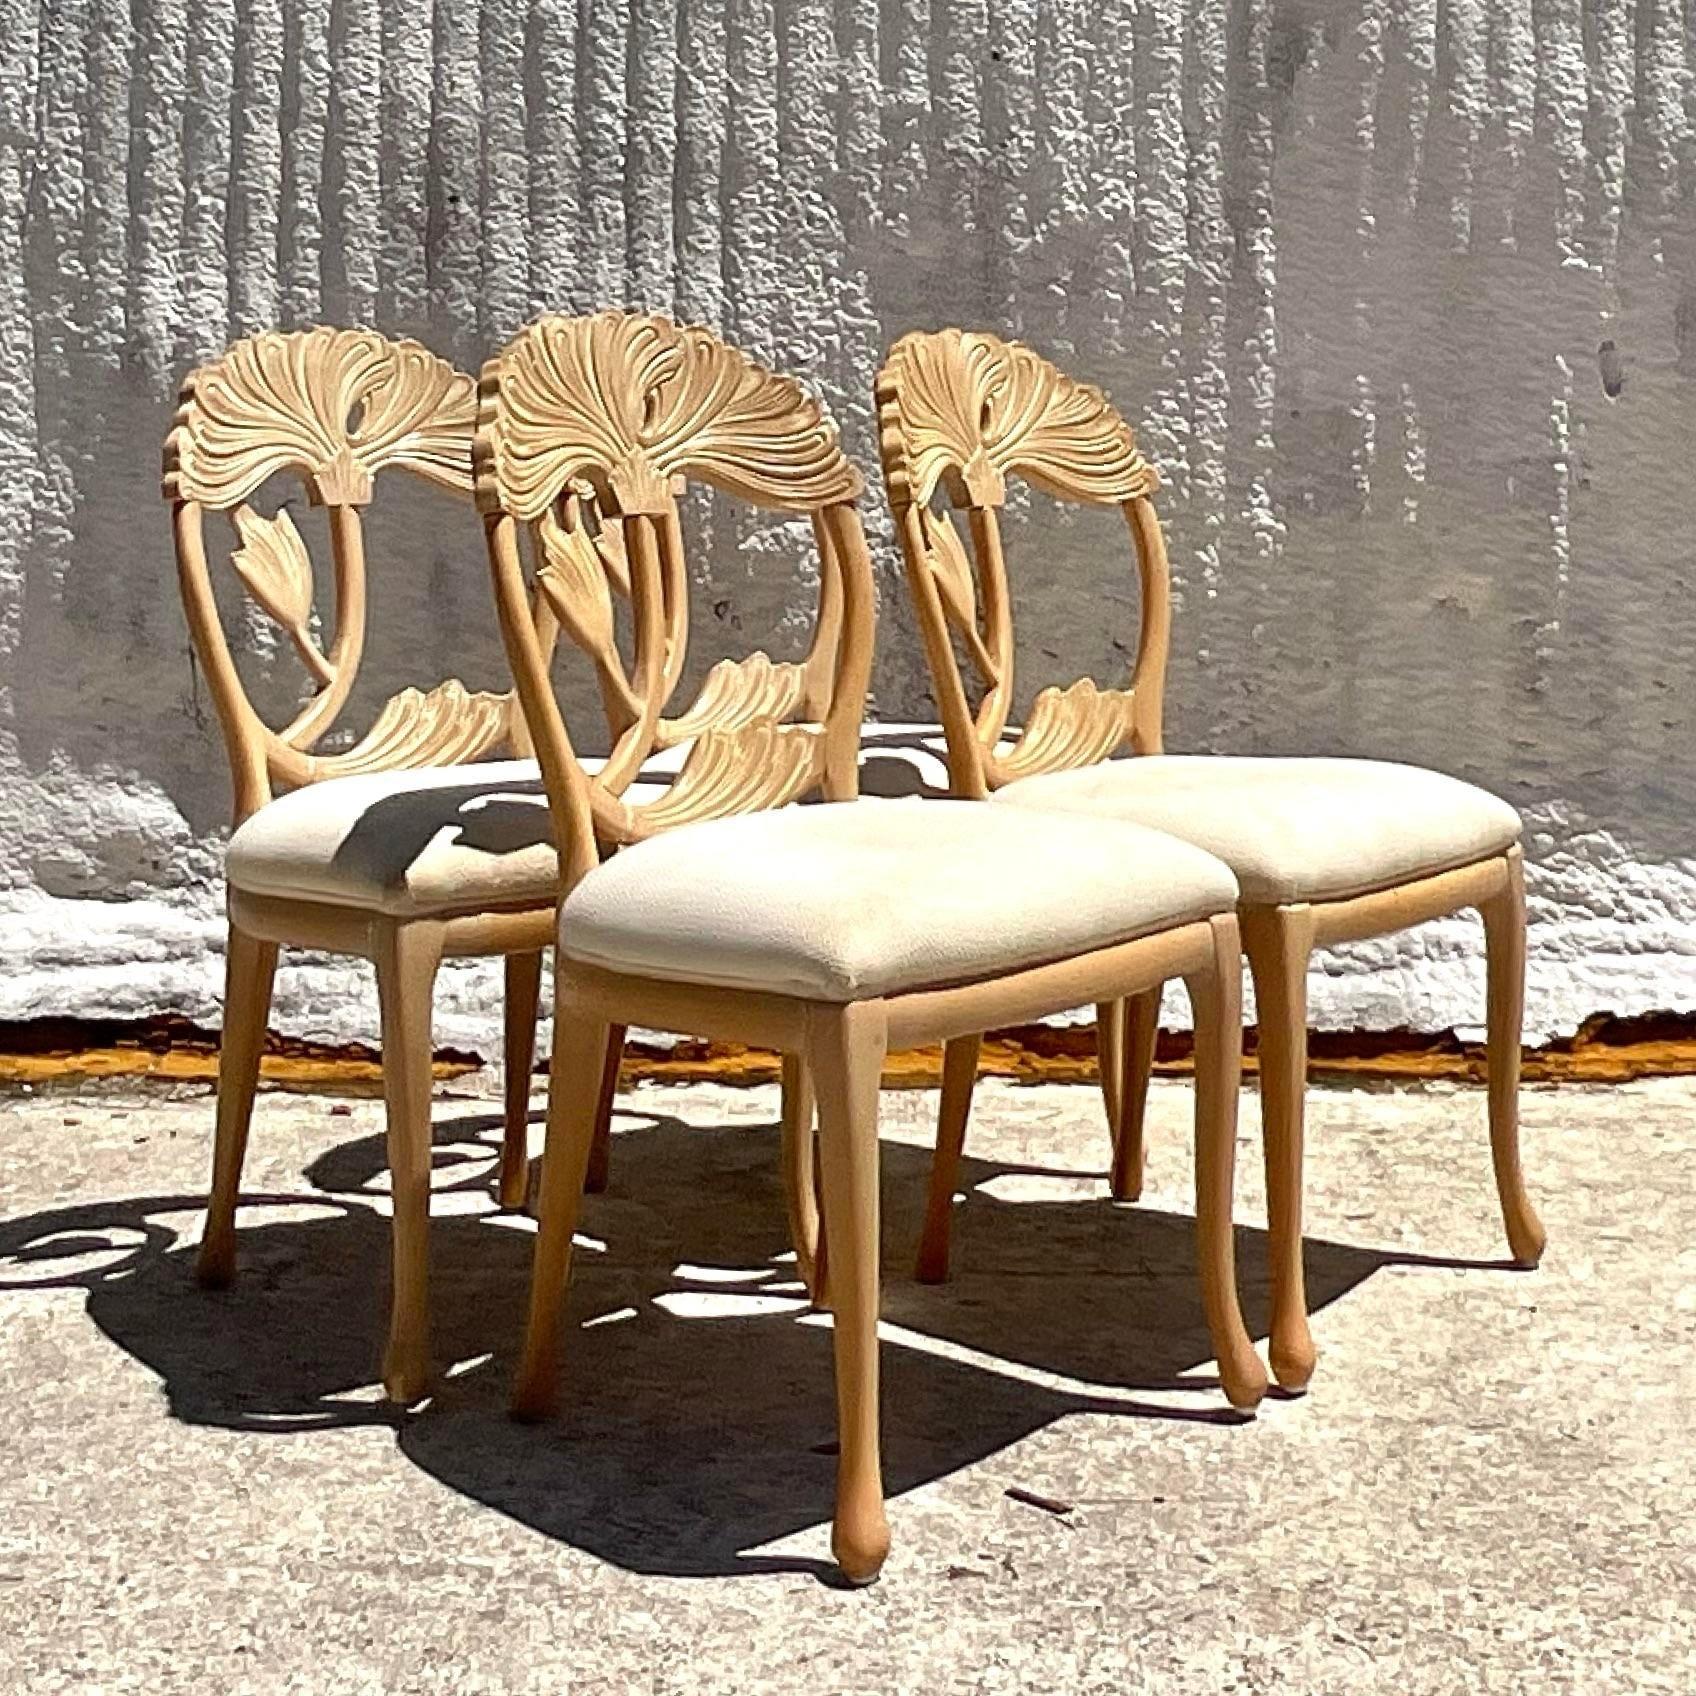 Vintage Boho Carved Lotus Blossom Dining Chairs - Set of 4 For Sale 2